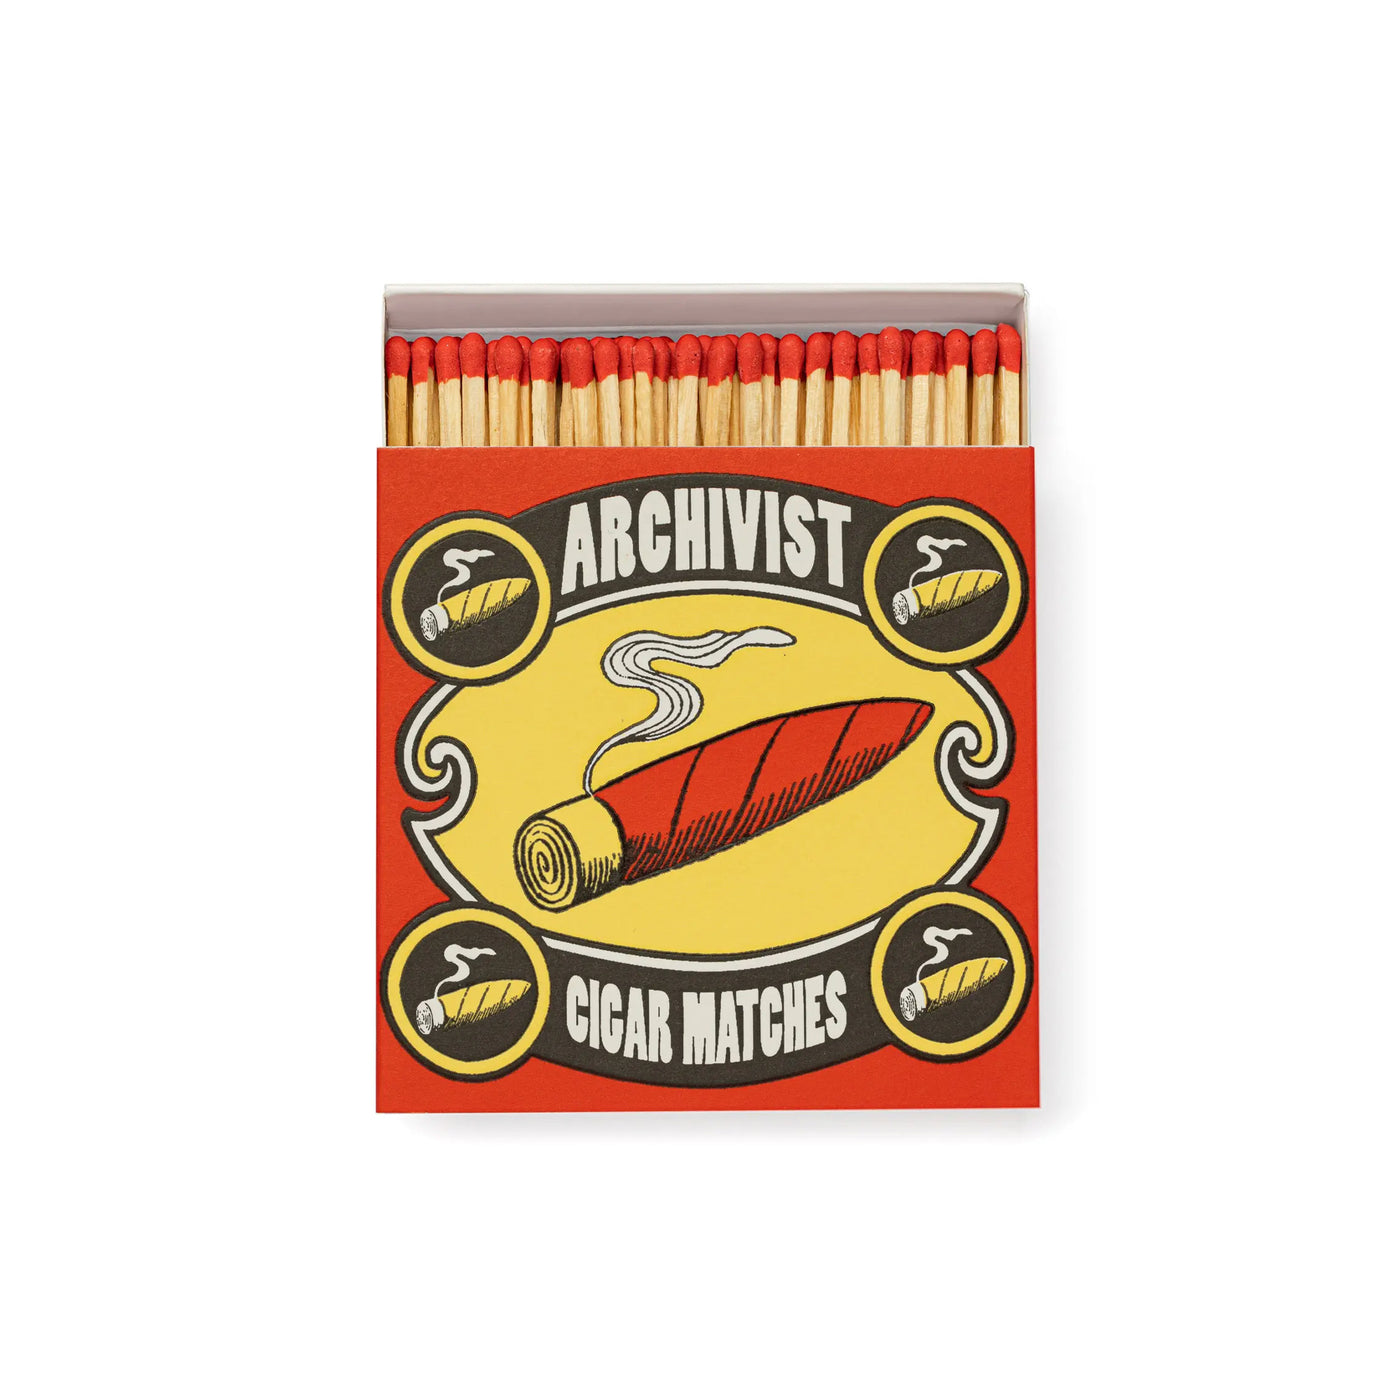 Cigar Matches by Archivist Gallery